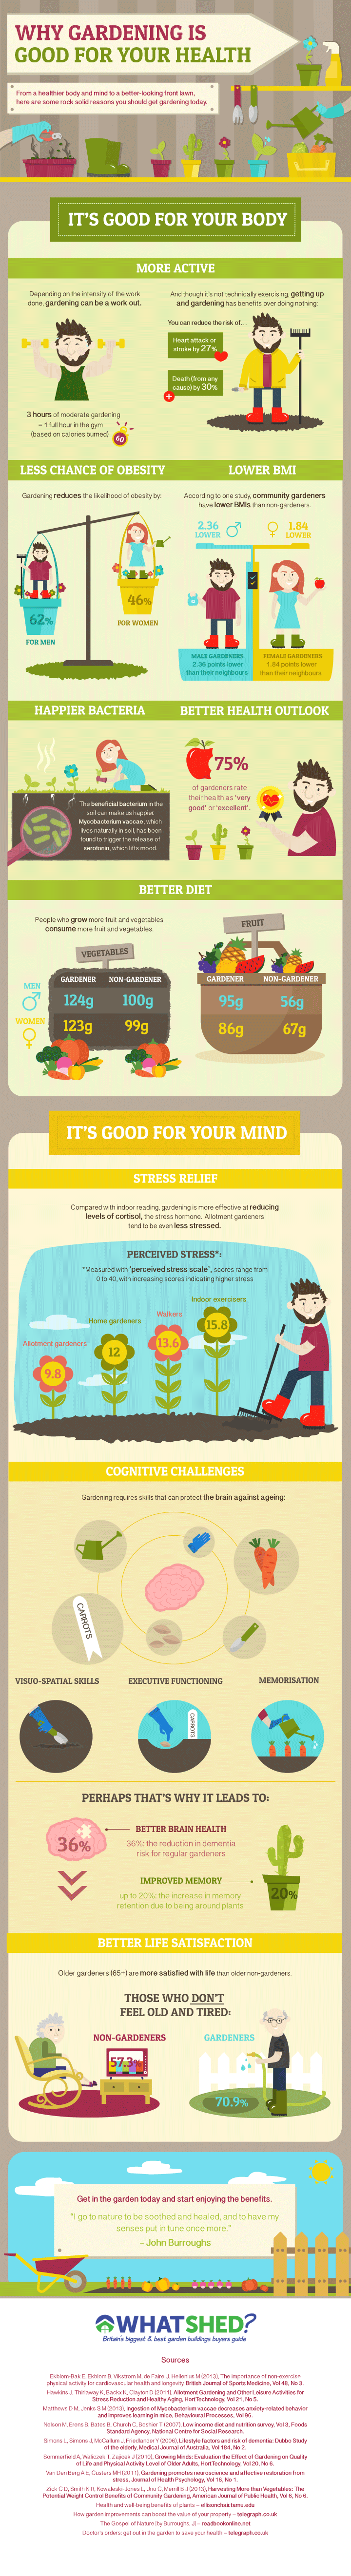 Why-gardening-is-good-for-your-health